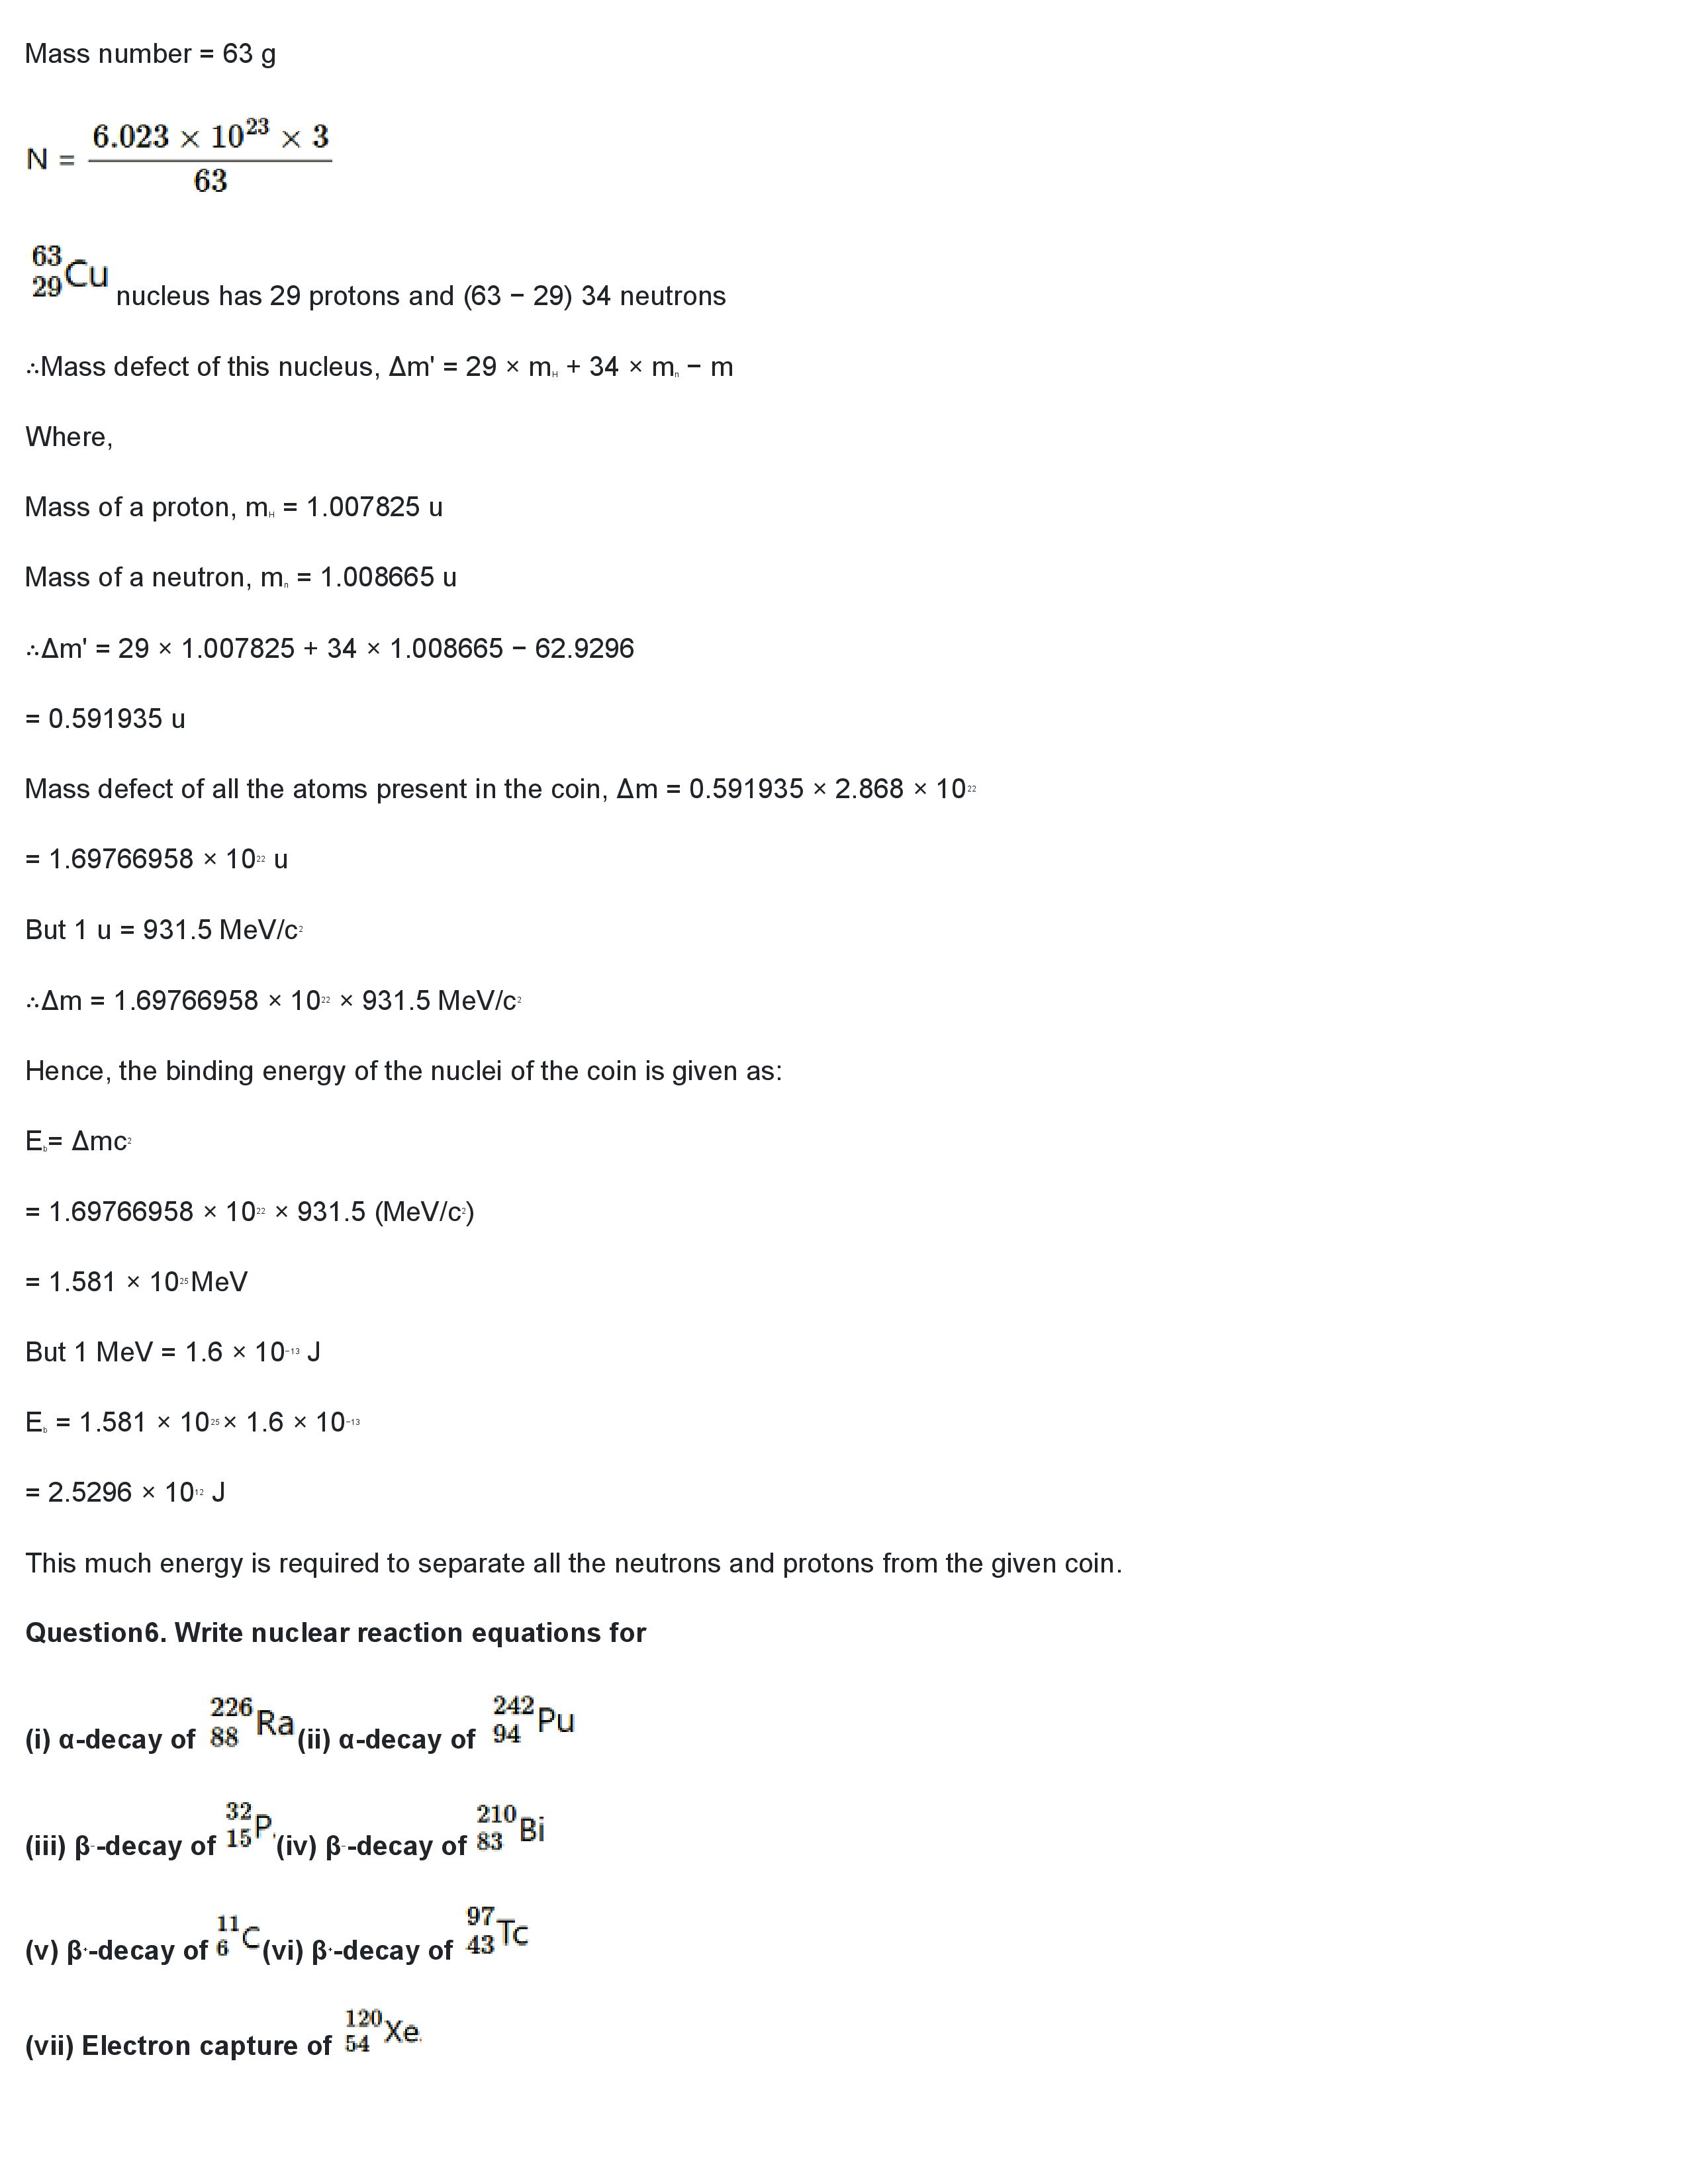 ""NCERT-Solutions-Class-12-Physics-Chapter-13-Nuclei-5